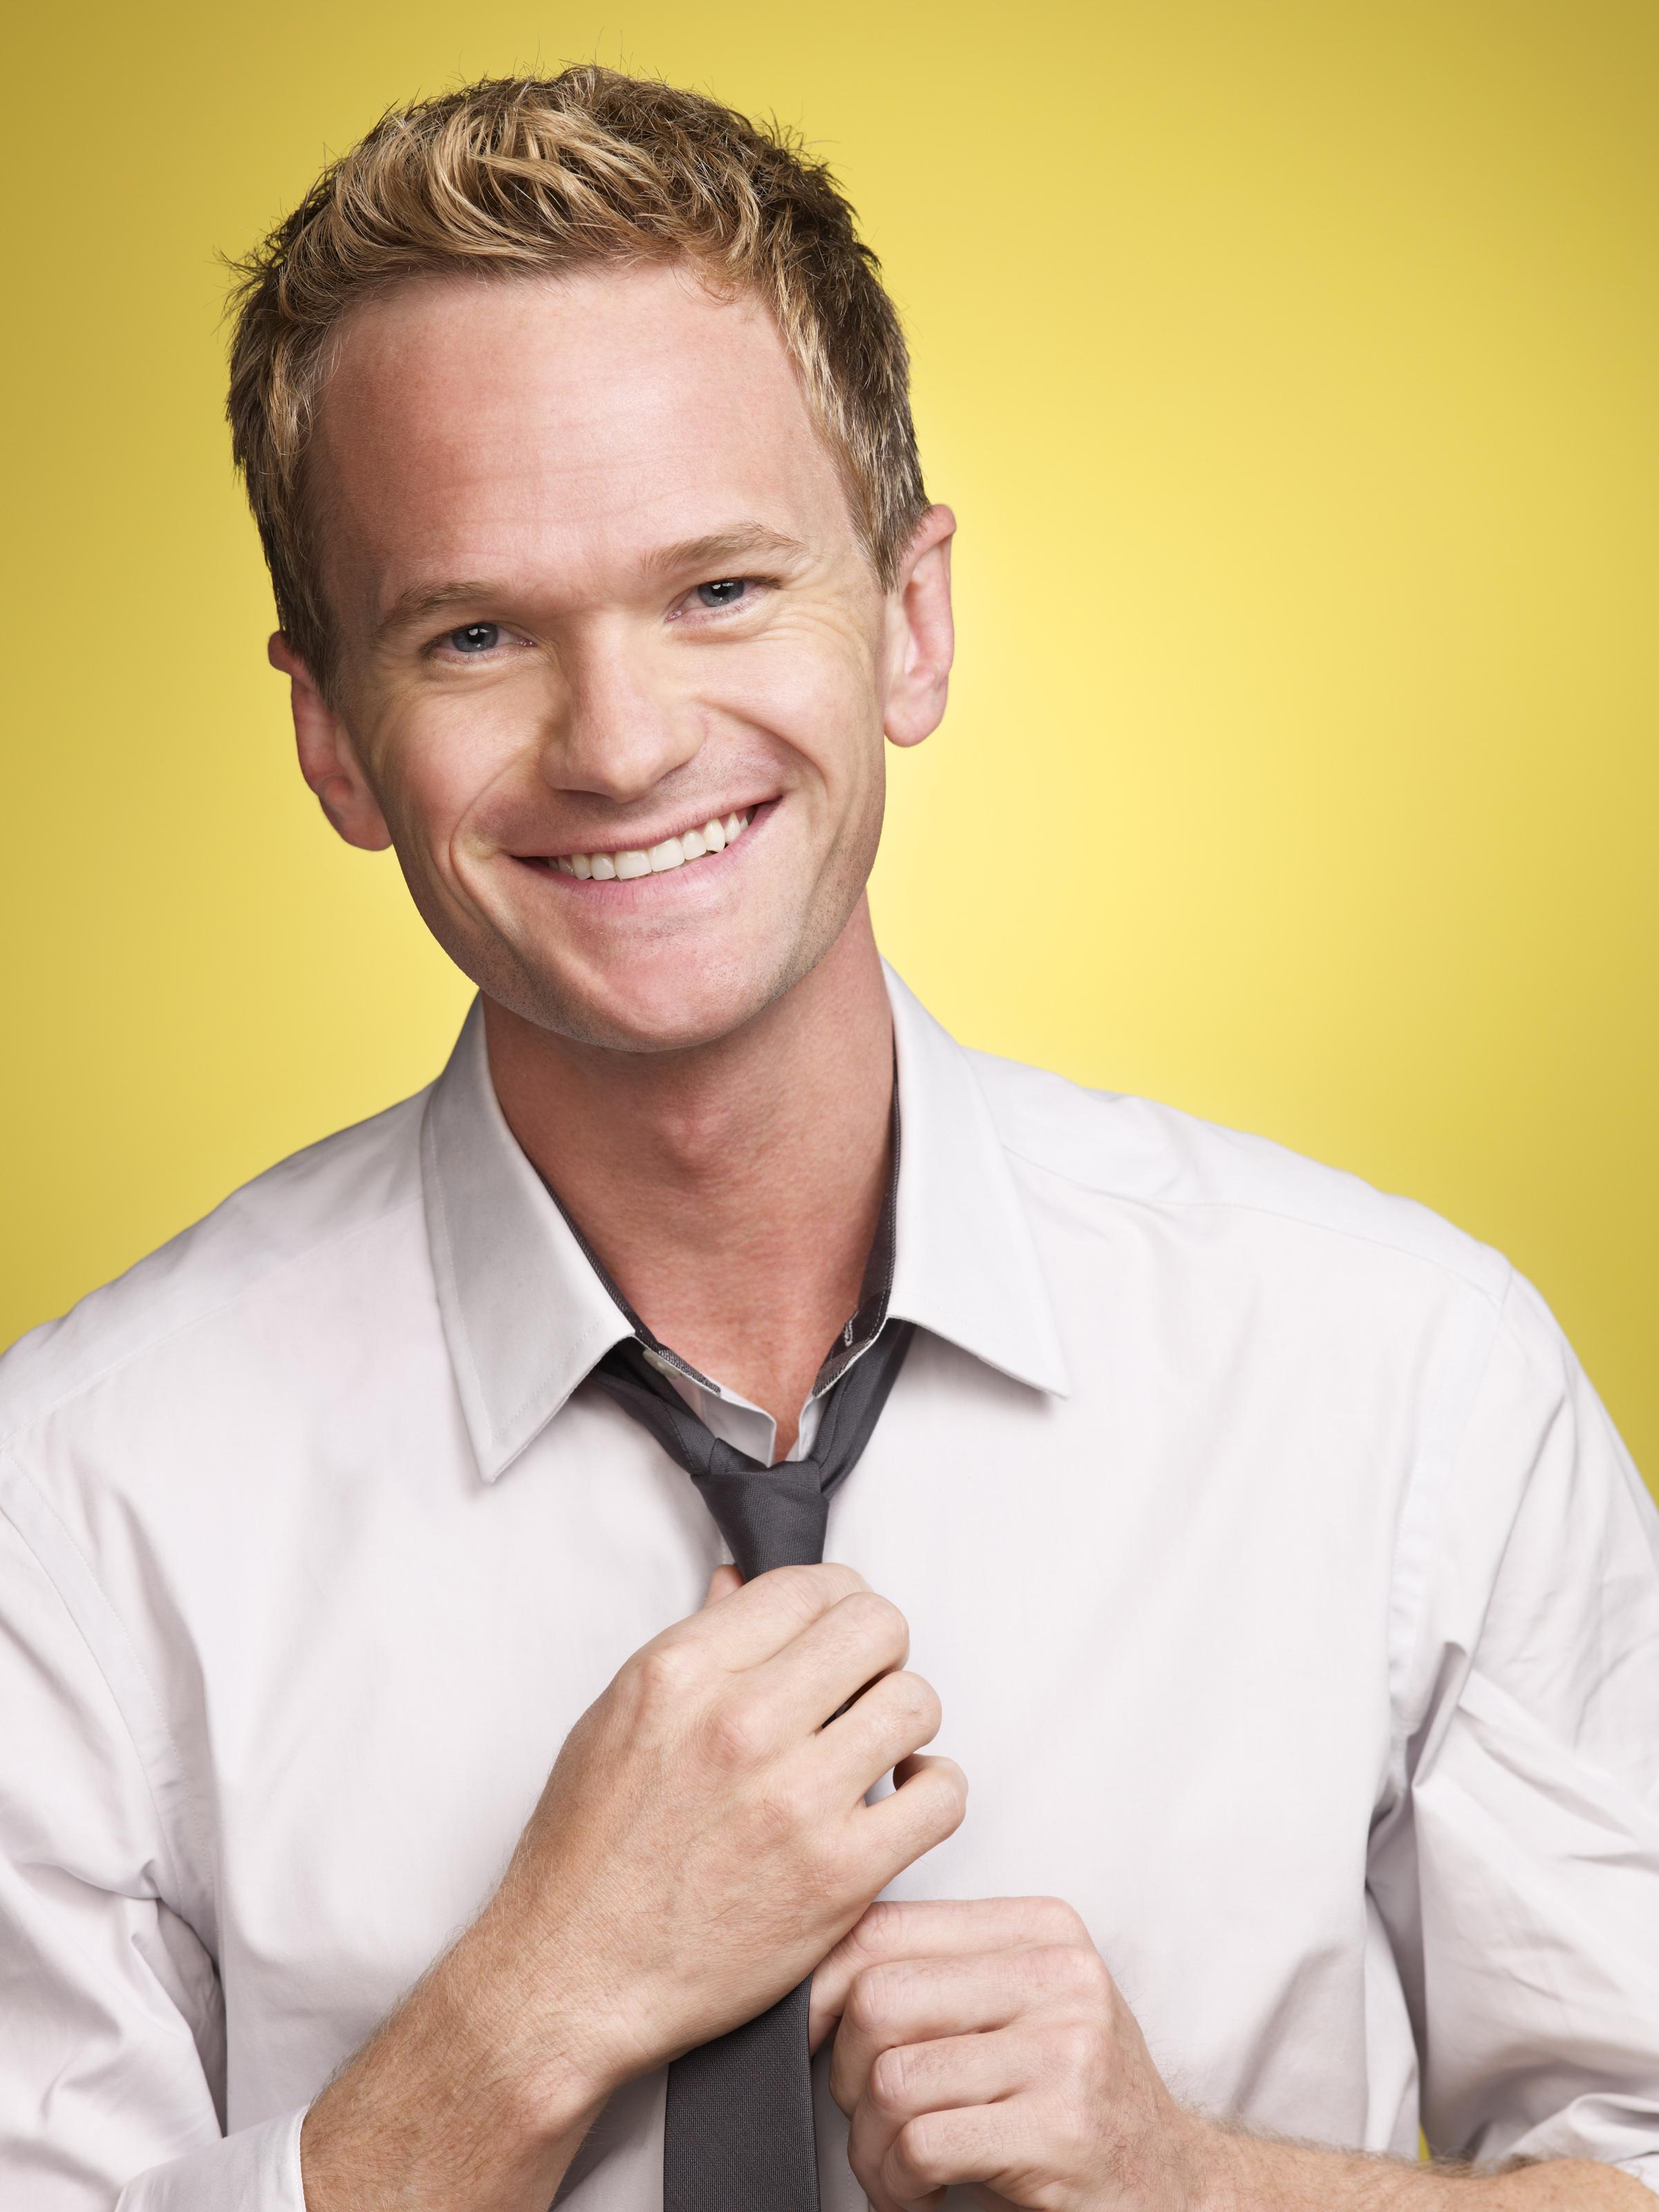 How I Met Your Mother ~ Barney Stinson